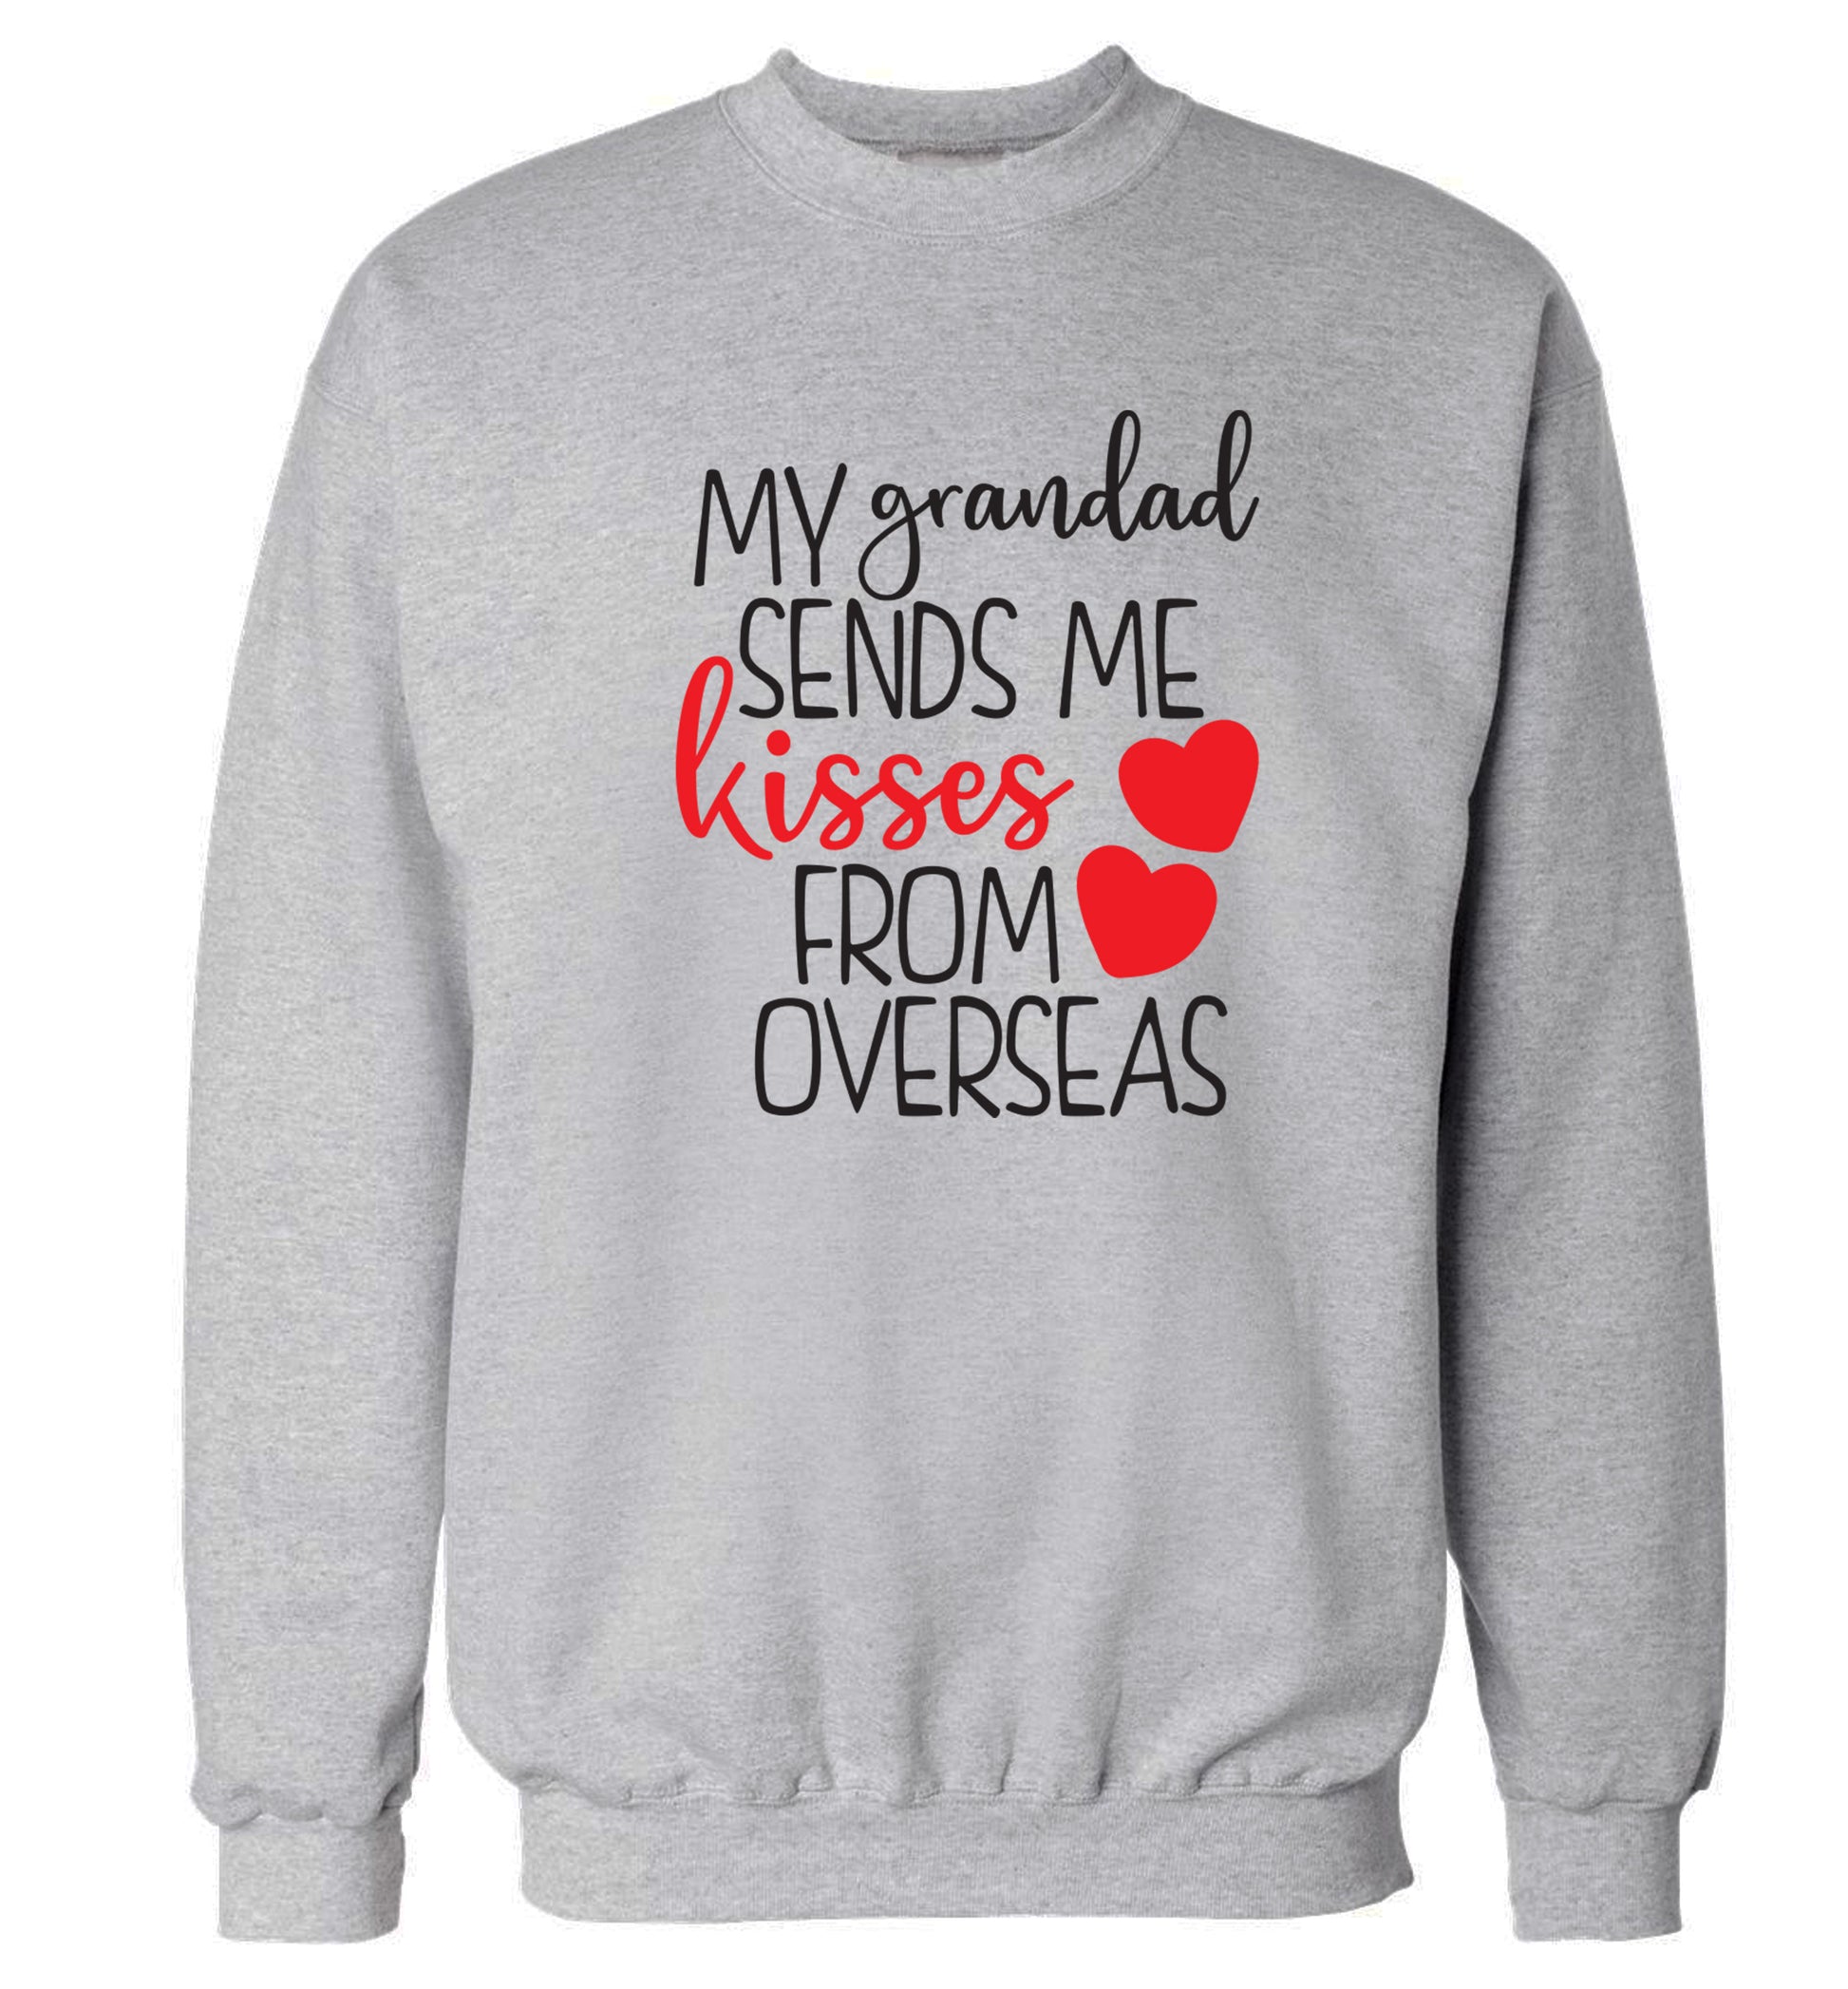 My Grandad sends me kisses from overseas Adult's unisex grey Sweater 2XL